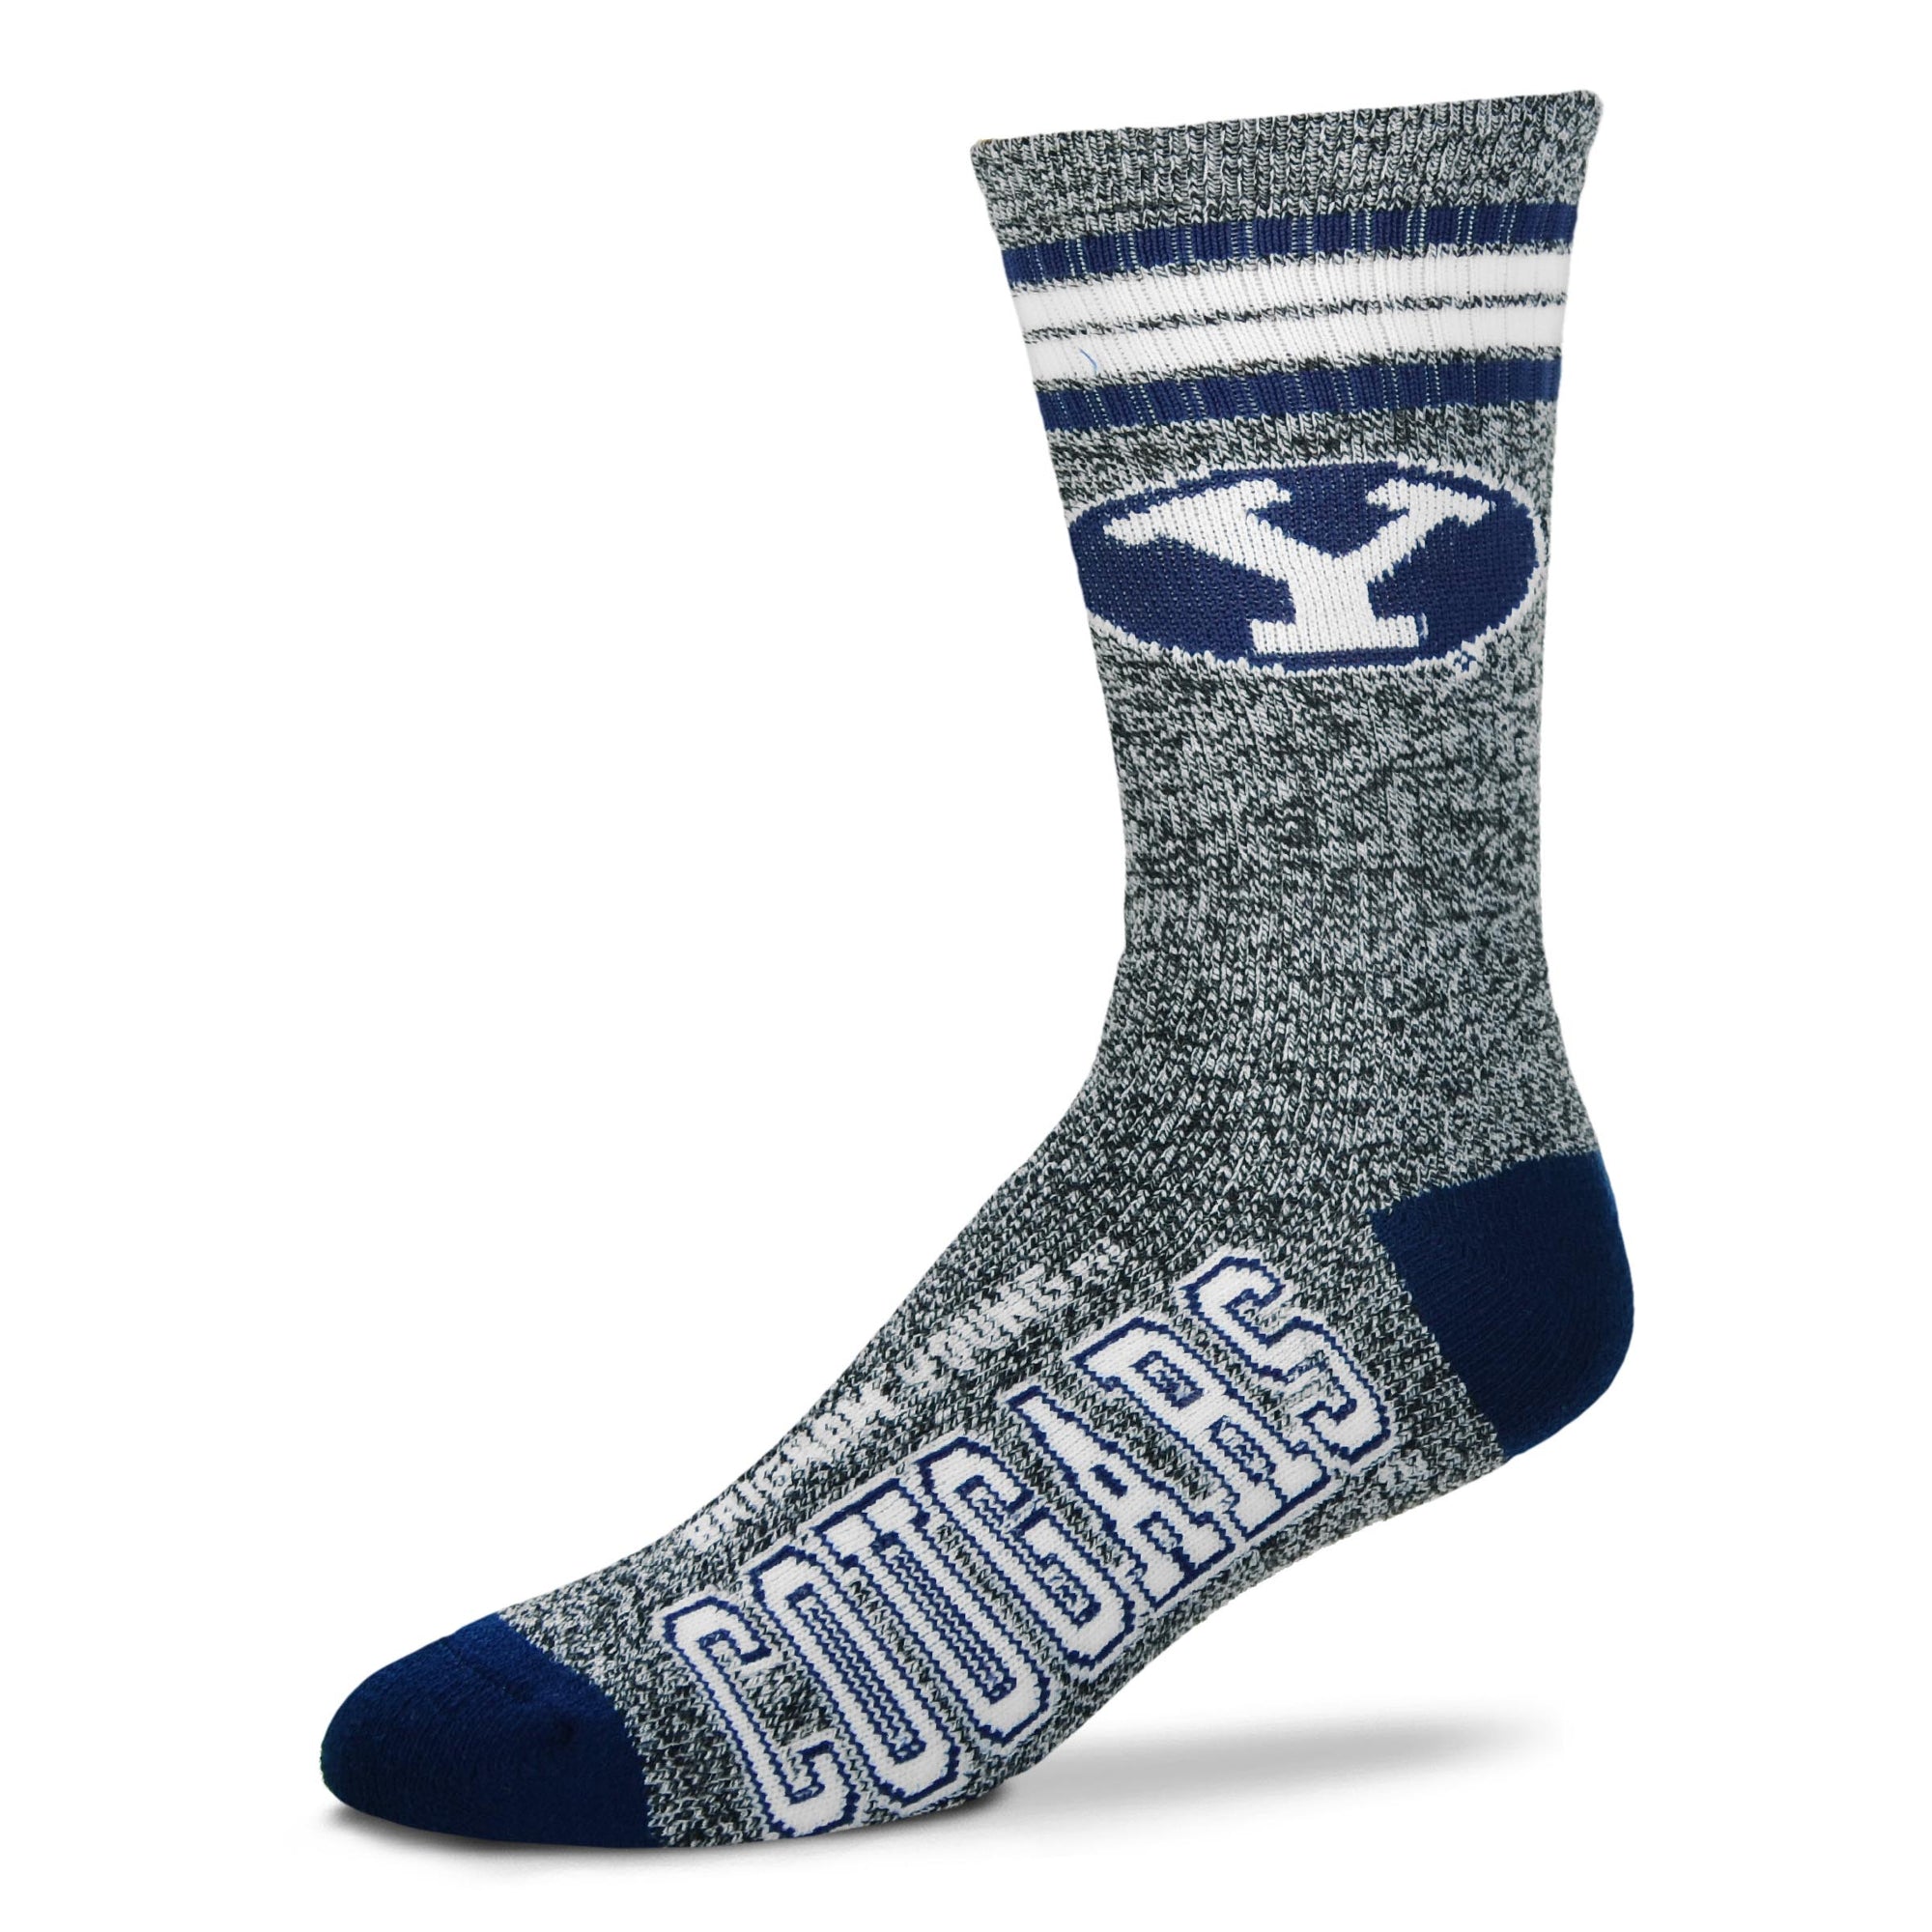 Brigham Young Cougars - Marbled 4 Stripe Deuce